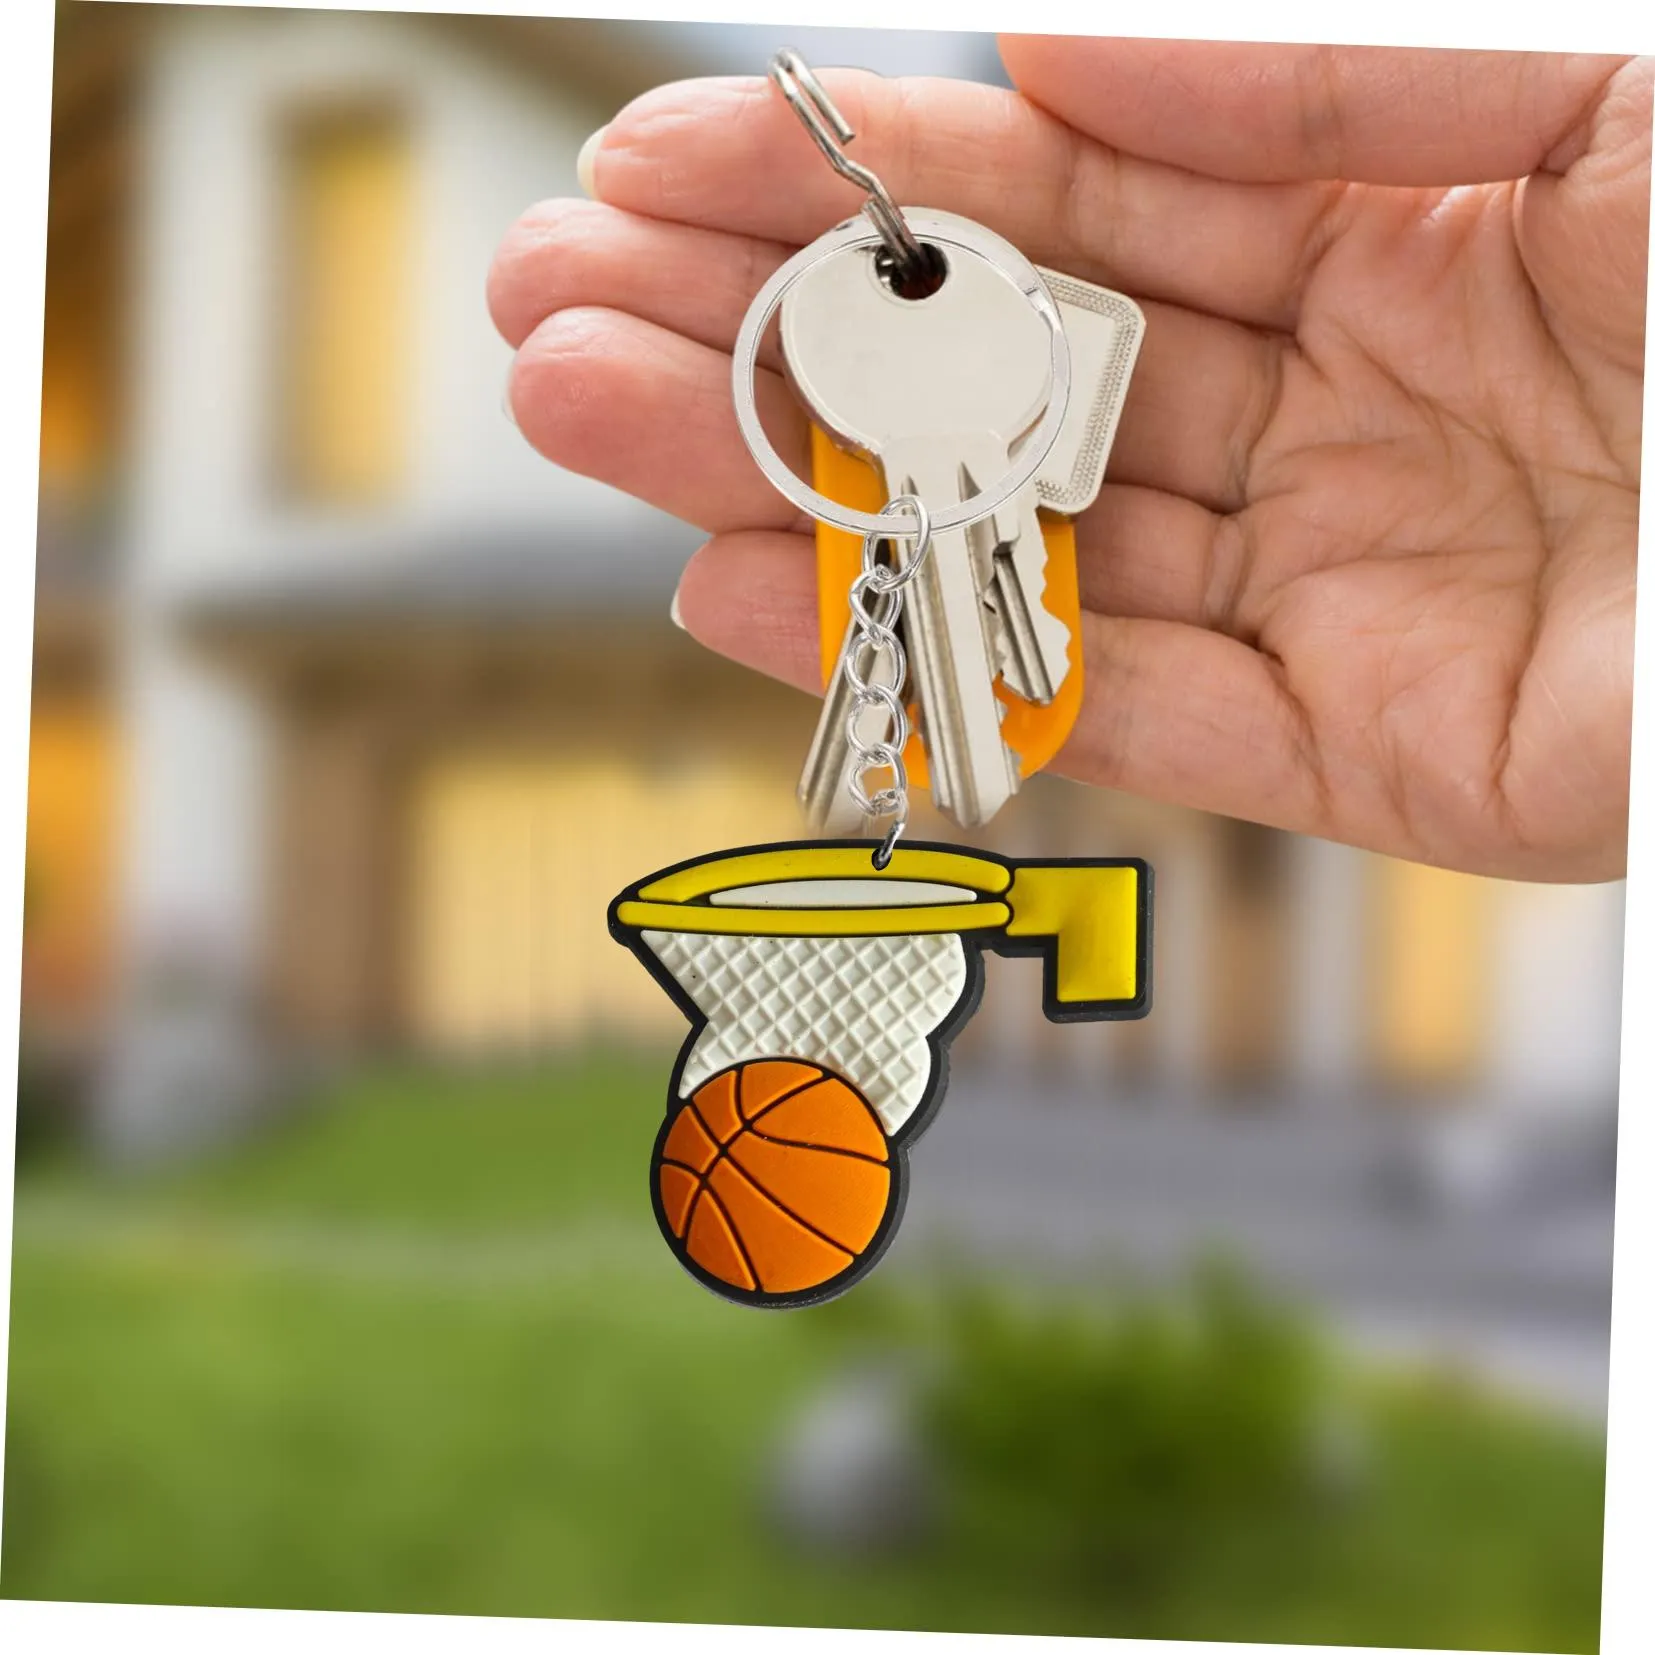 basketball 27 keychain anime cool keychains for backpacks women key pendant accessories bags keyring suitable schoolbag chain party favors gift childrens backpack car charms